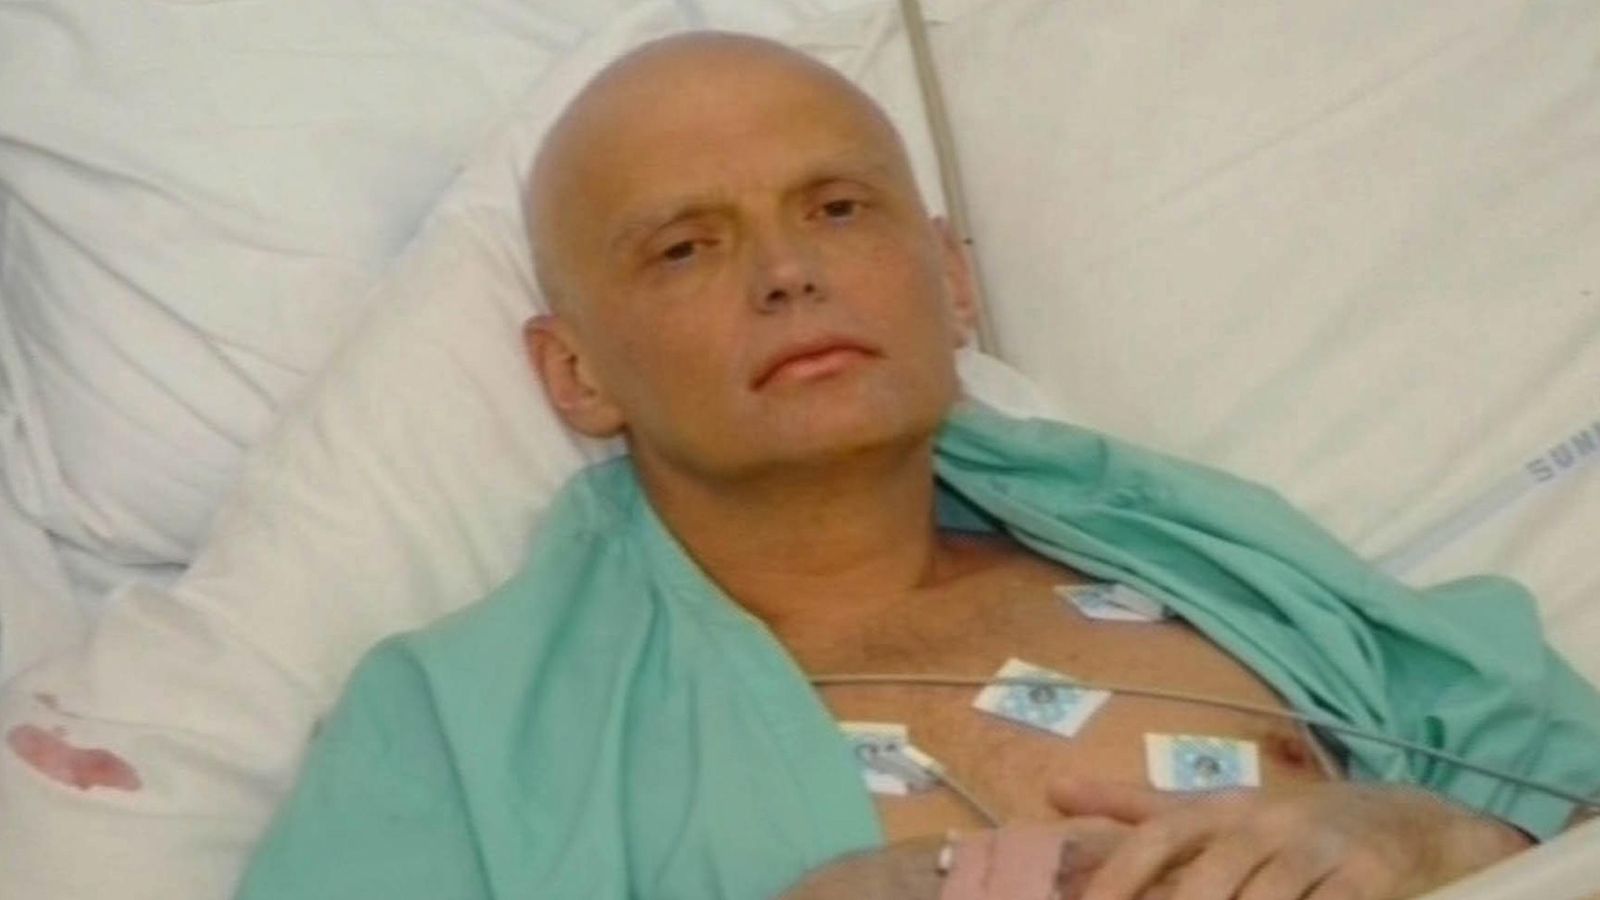 Alexander Litvinenko: Russia responsible for assassination in London, European Court of Human Rights rules